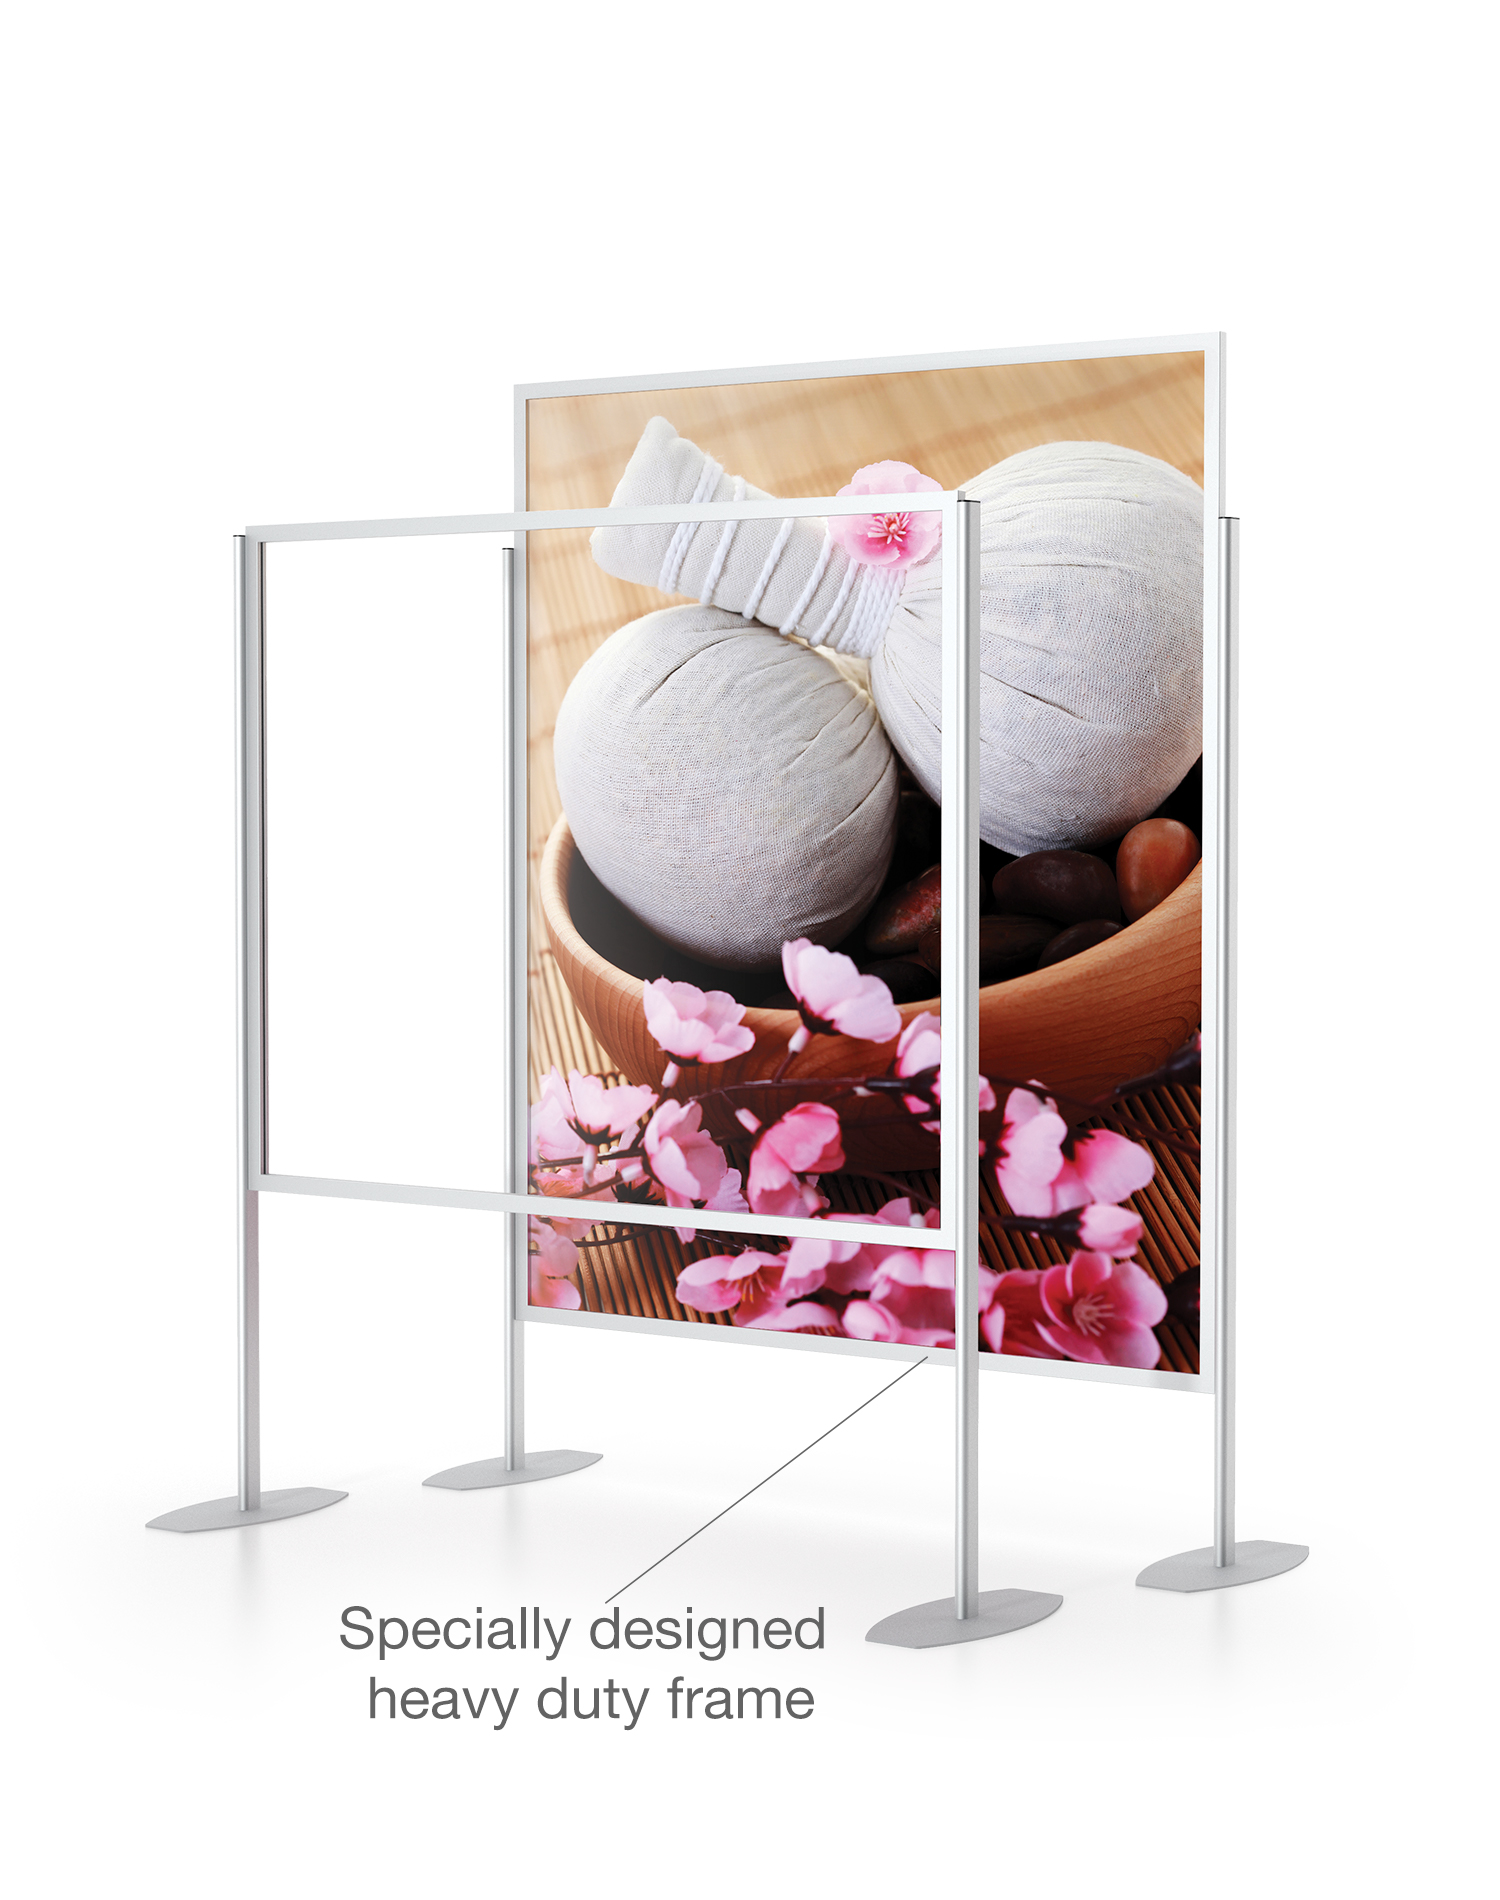 Display Solutions